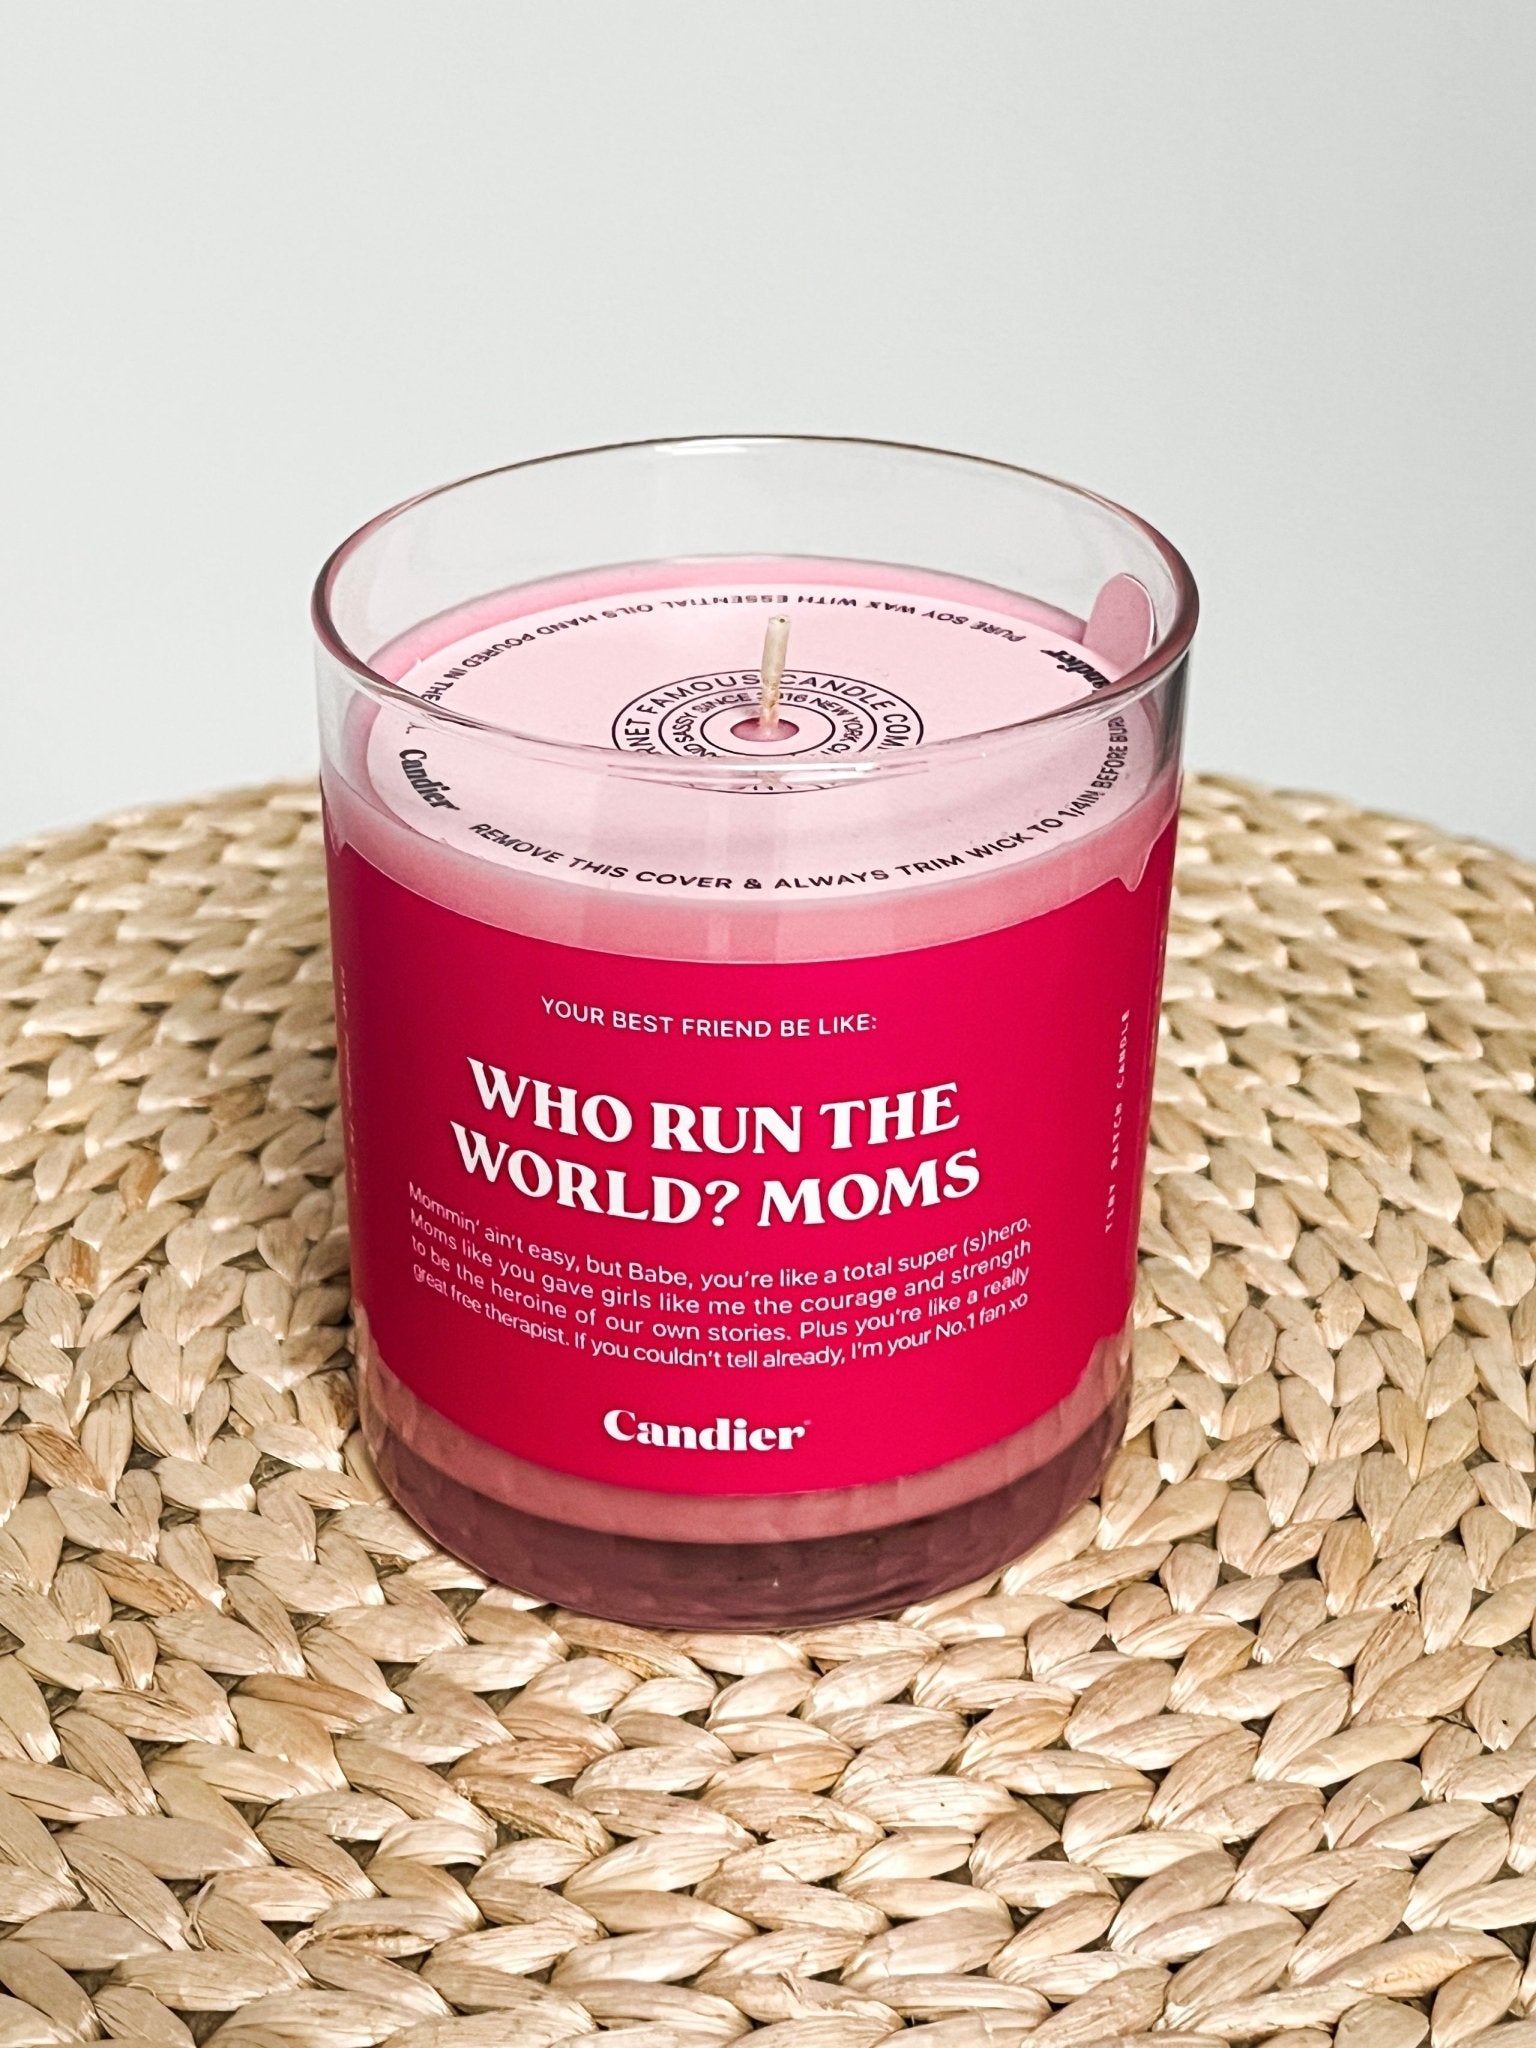 Who runs the world Moms candle 9 oz - Cute candle - Cute Mom Gift Ideas at Lush Fashion Lounge in Oklahoma